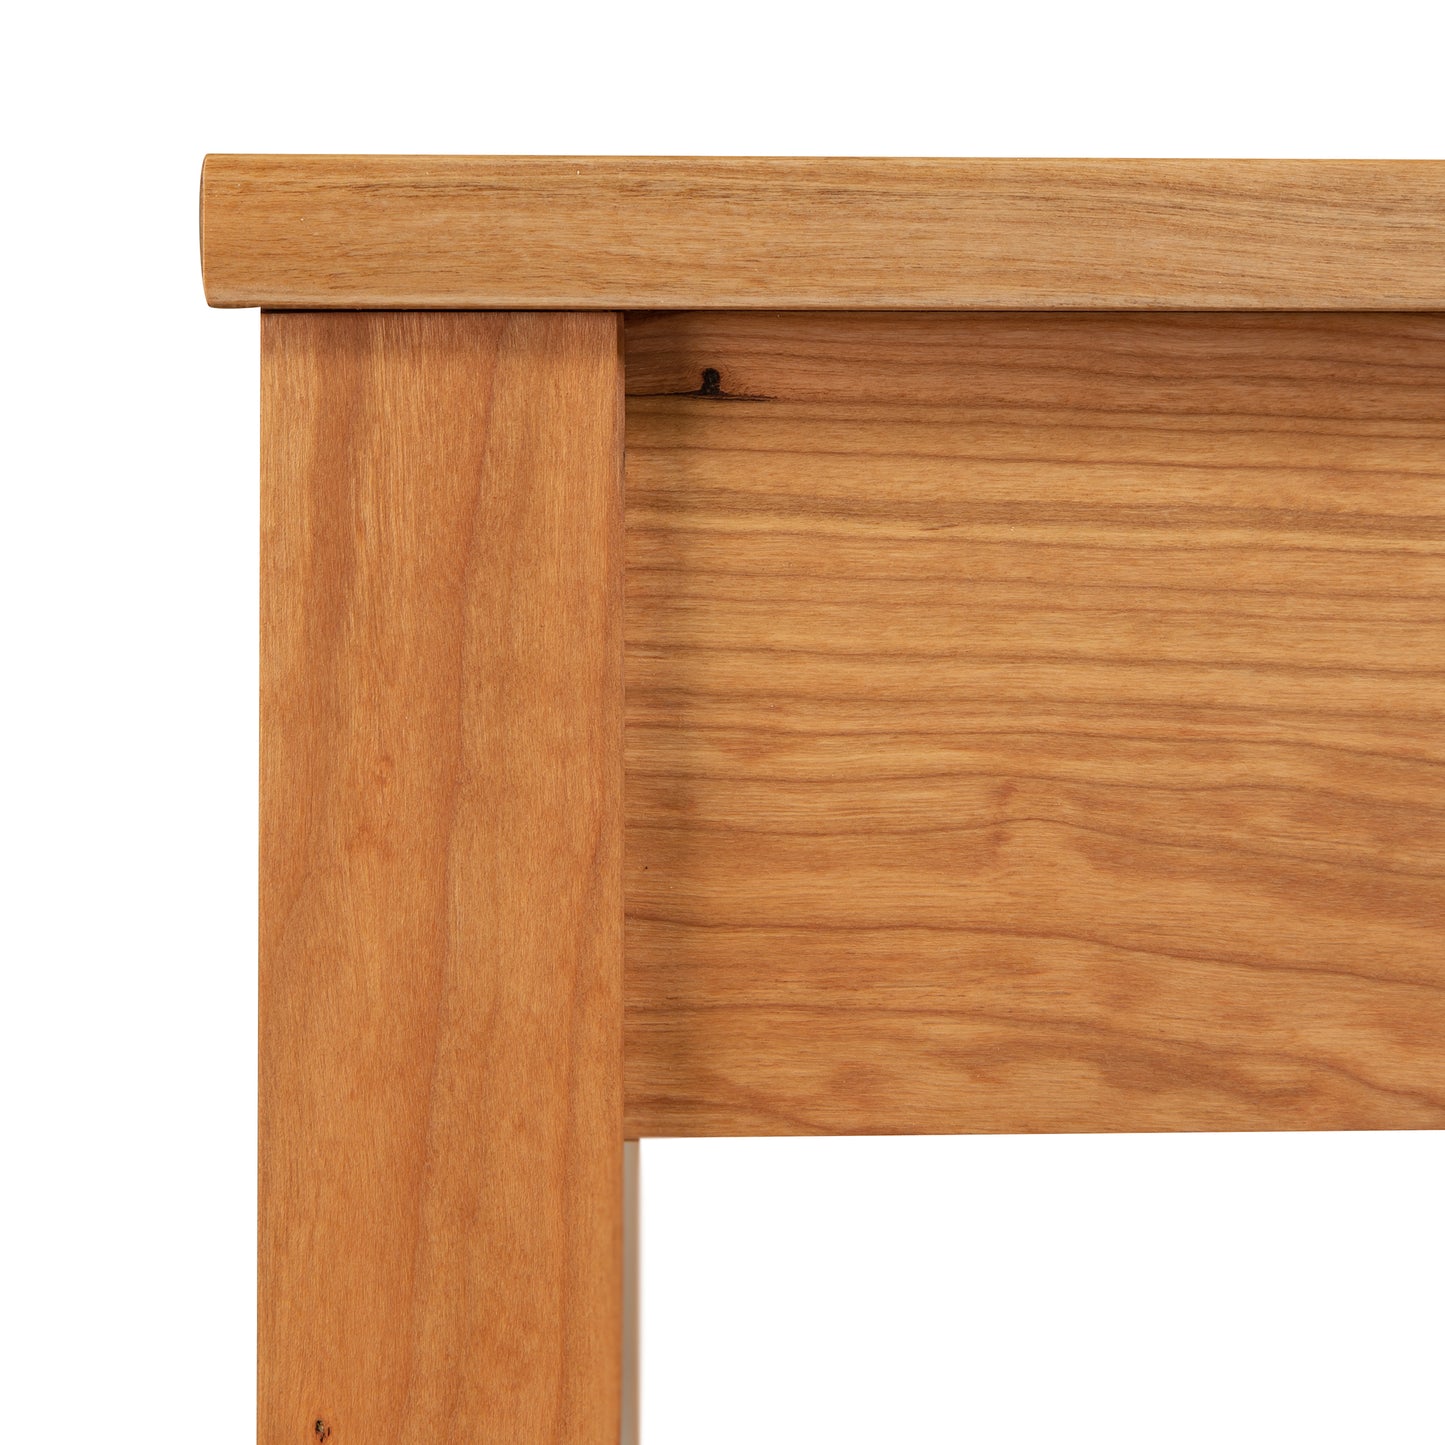 Close-up of a Maple Corner Woodworks Andover Modern Writing Desk joint showing the texture and grain of the wood.